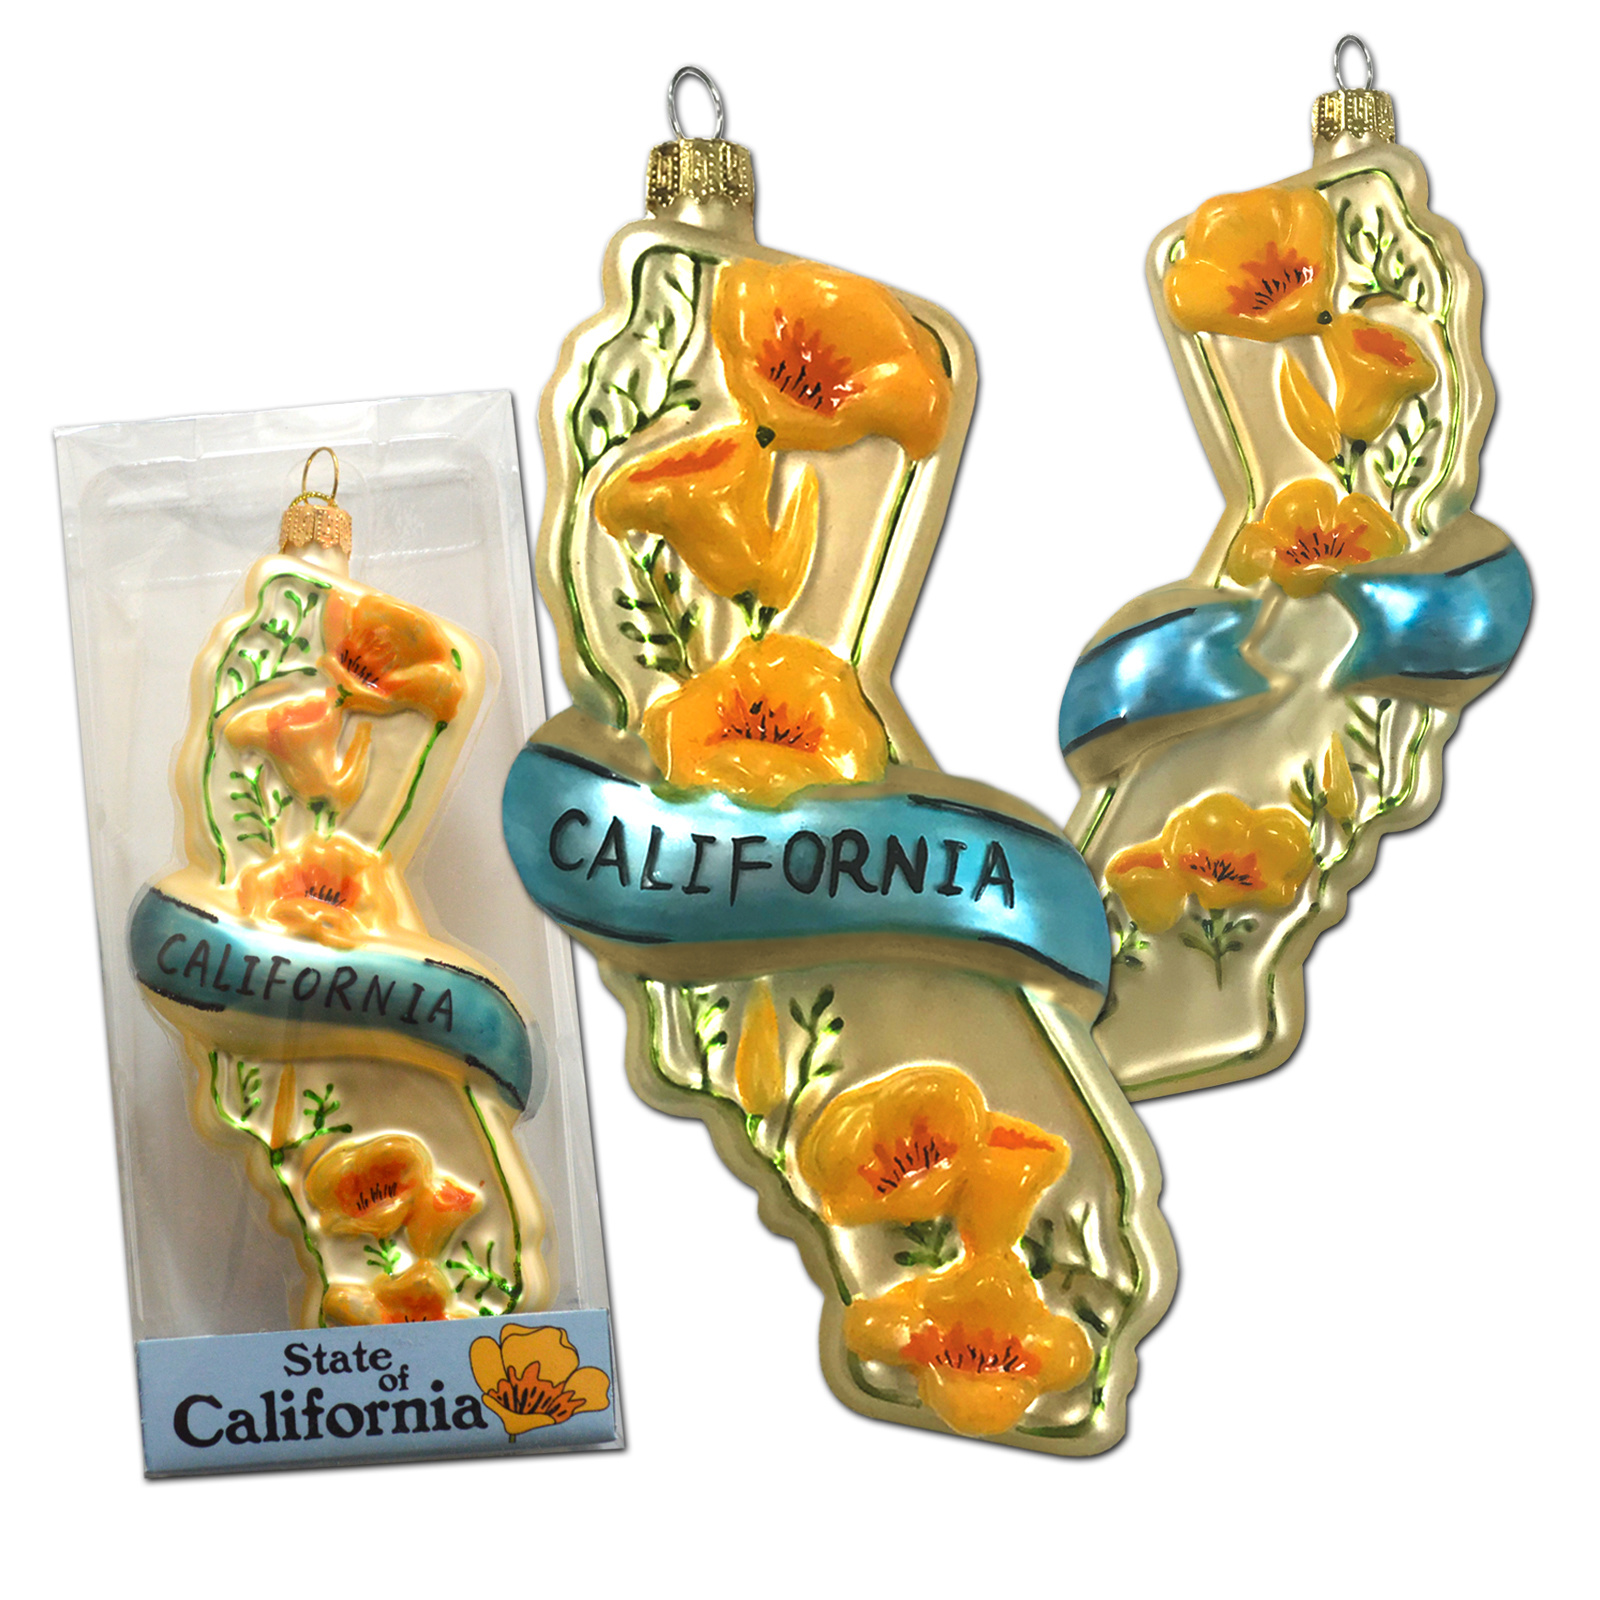 State of California w/ Poppies Glass Mold Ornament